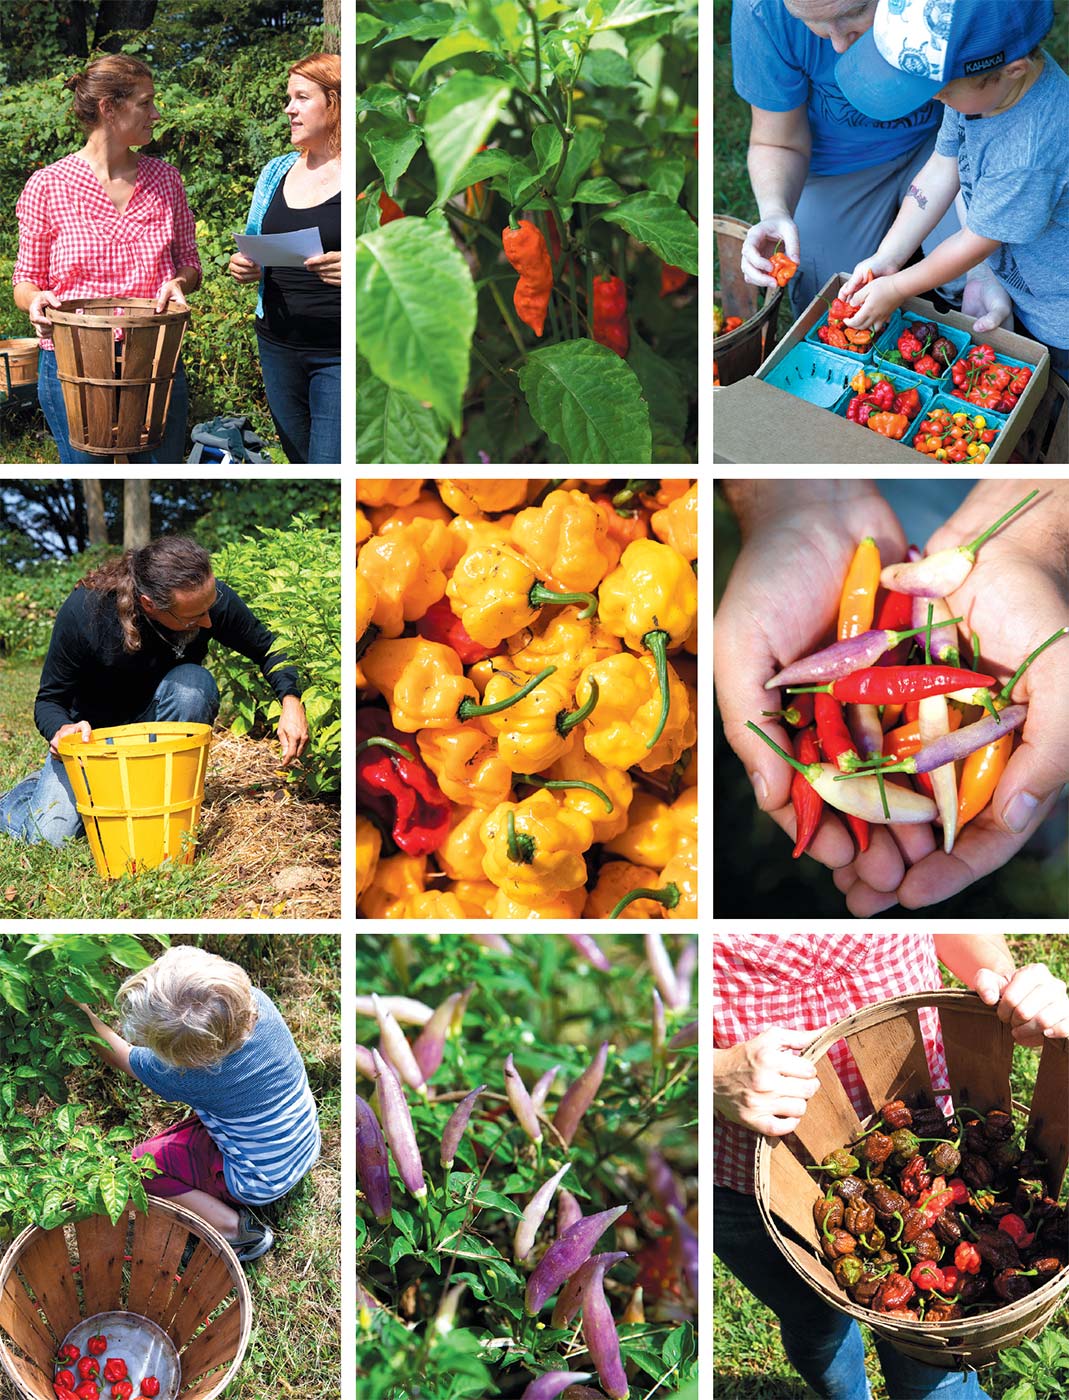 Top row, left to right: the author and Jasko picking peppers, ghost peppers growing, volunteers sort peppers.  Middle row, left to right: a volunteer picks peppers, Papa New Dreadie peppers, a volunteer holds a variety of peppers.  Bottom row: volunteer picking peppers, Aji Fantasy peppers, basket of Caribbean Reds